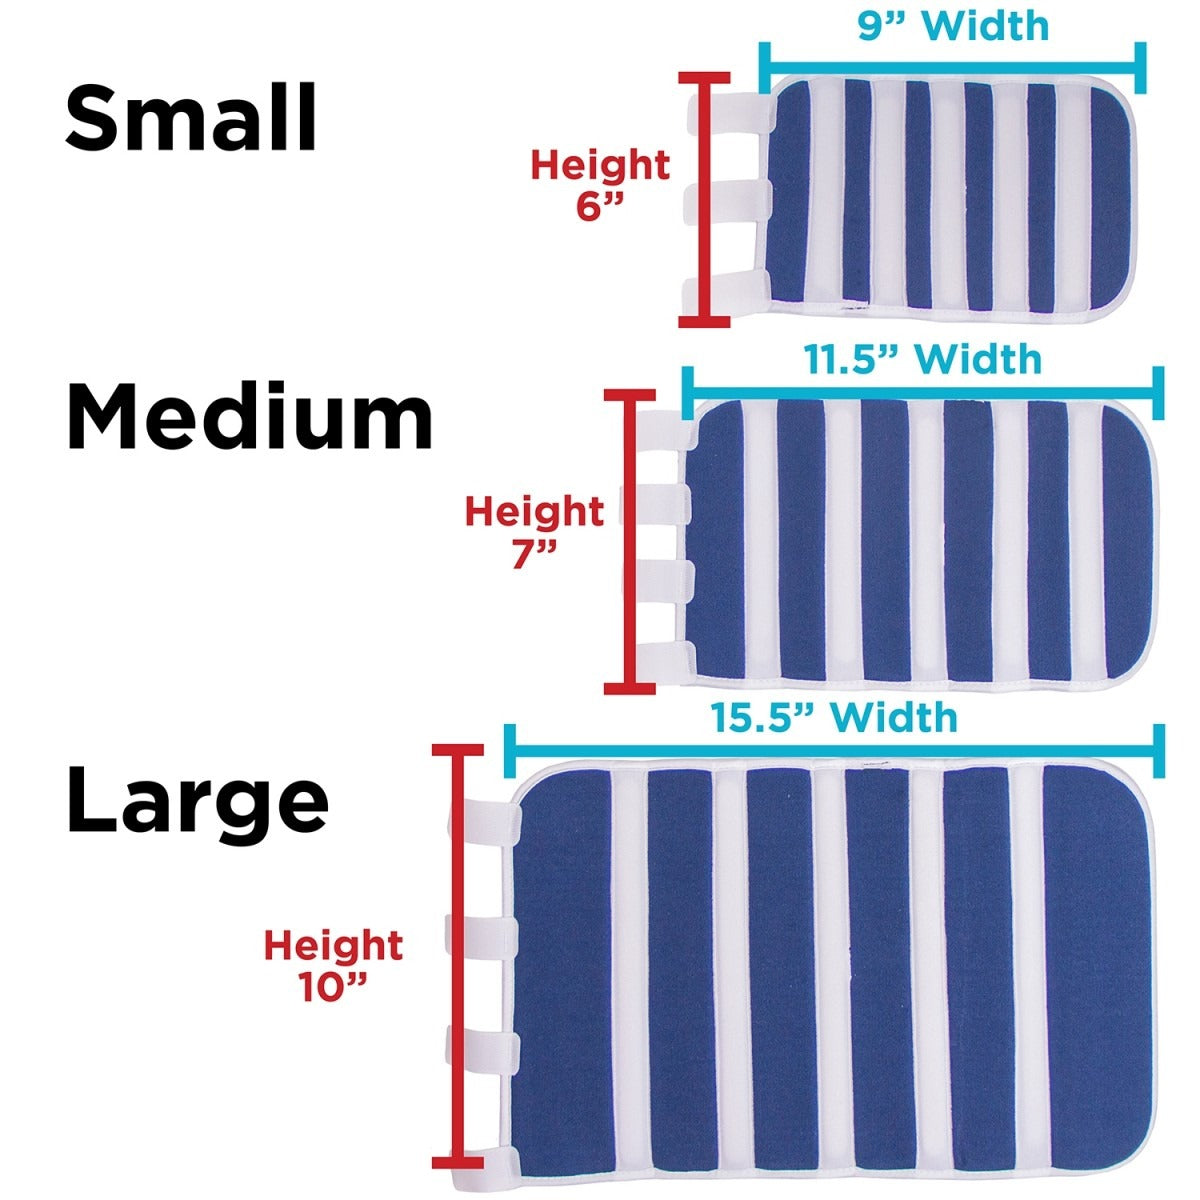  S is 6" tall and 9" wide. M is 7" tall and 11.5" wide. L is 10" tall and 15.5" wide.